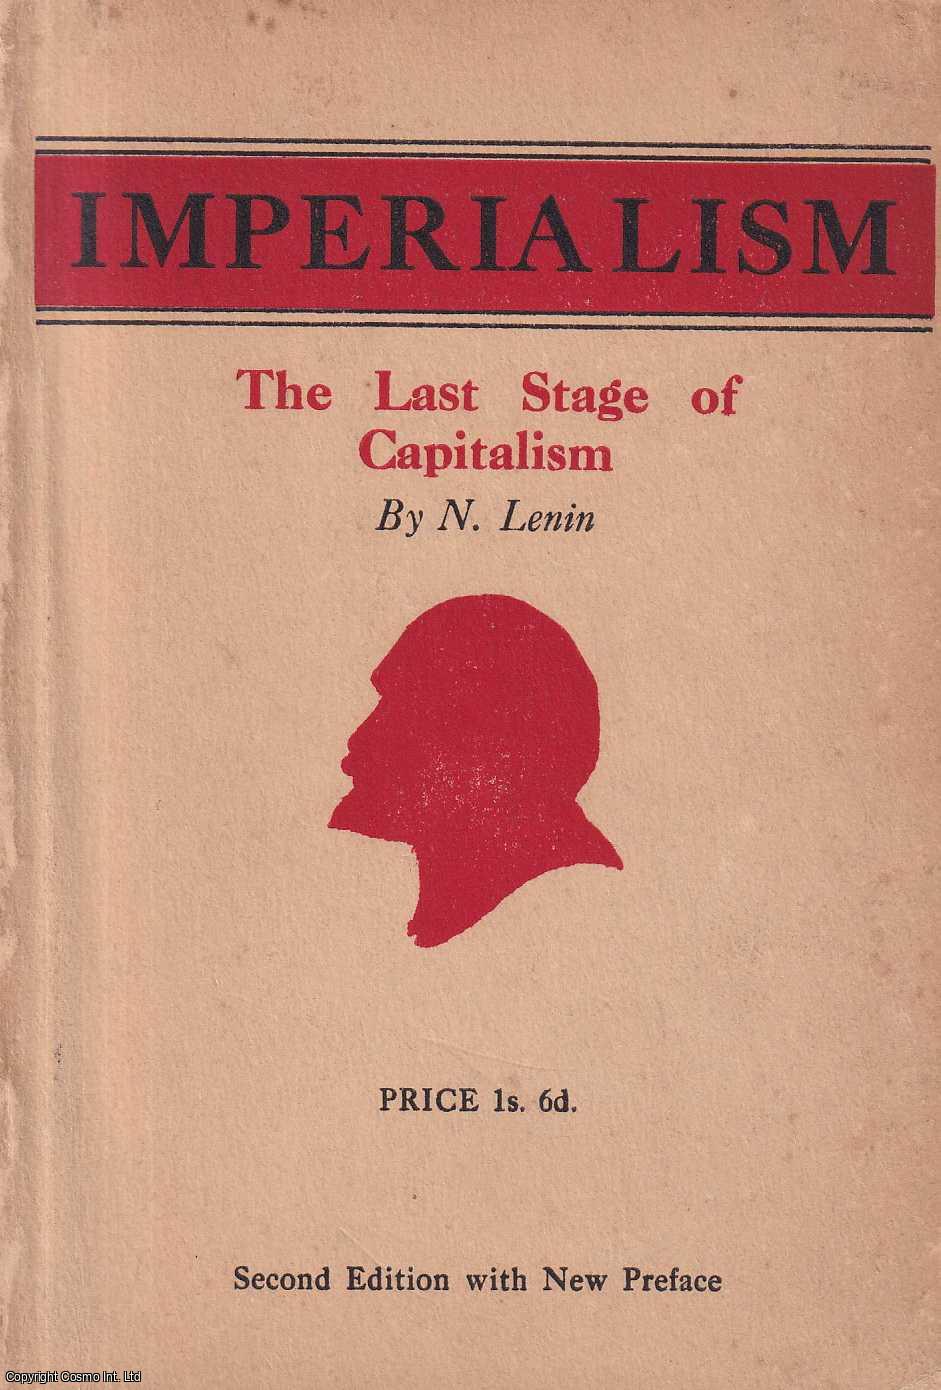 N. Lenin - Imperialism: The Last Stage of Capitalism. Published by Communist Party of Great Britain 1927.